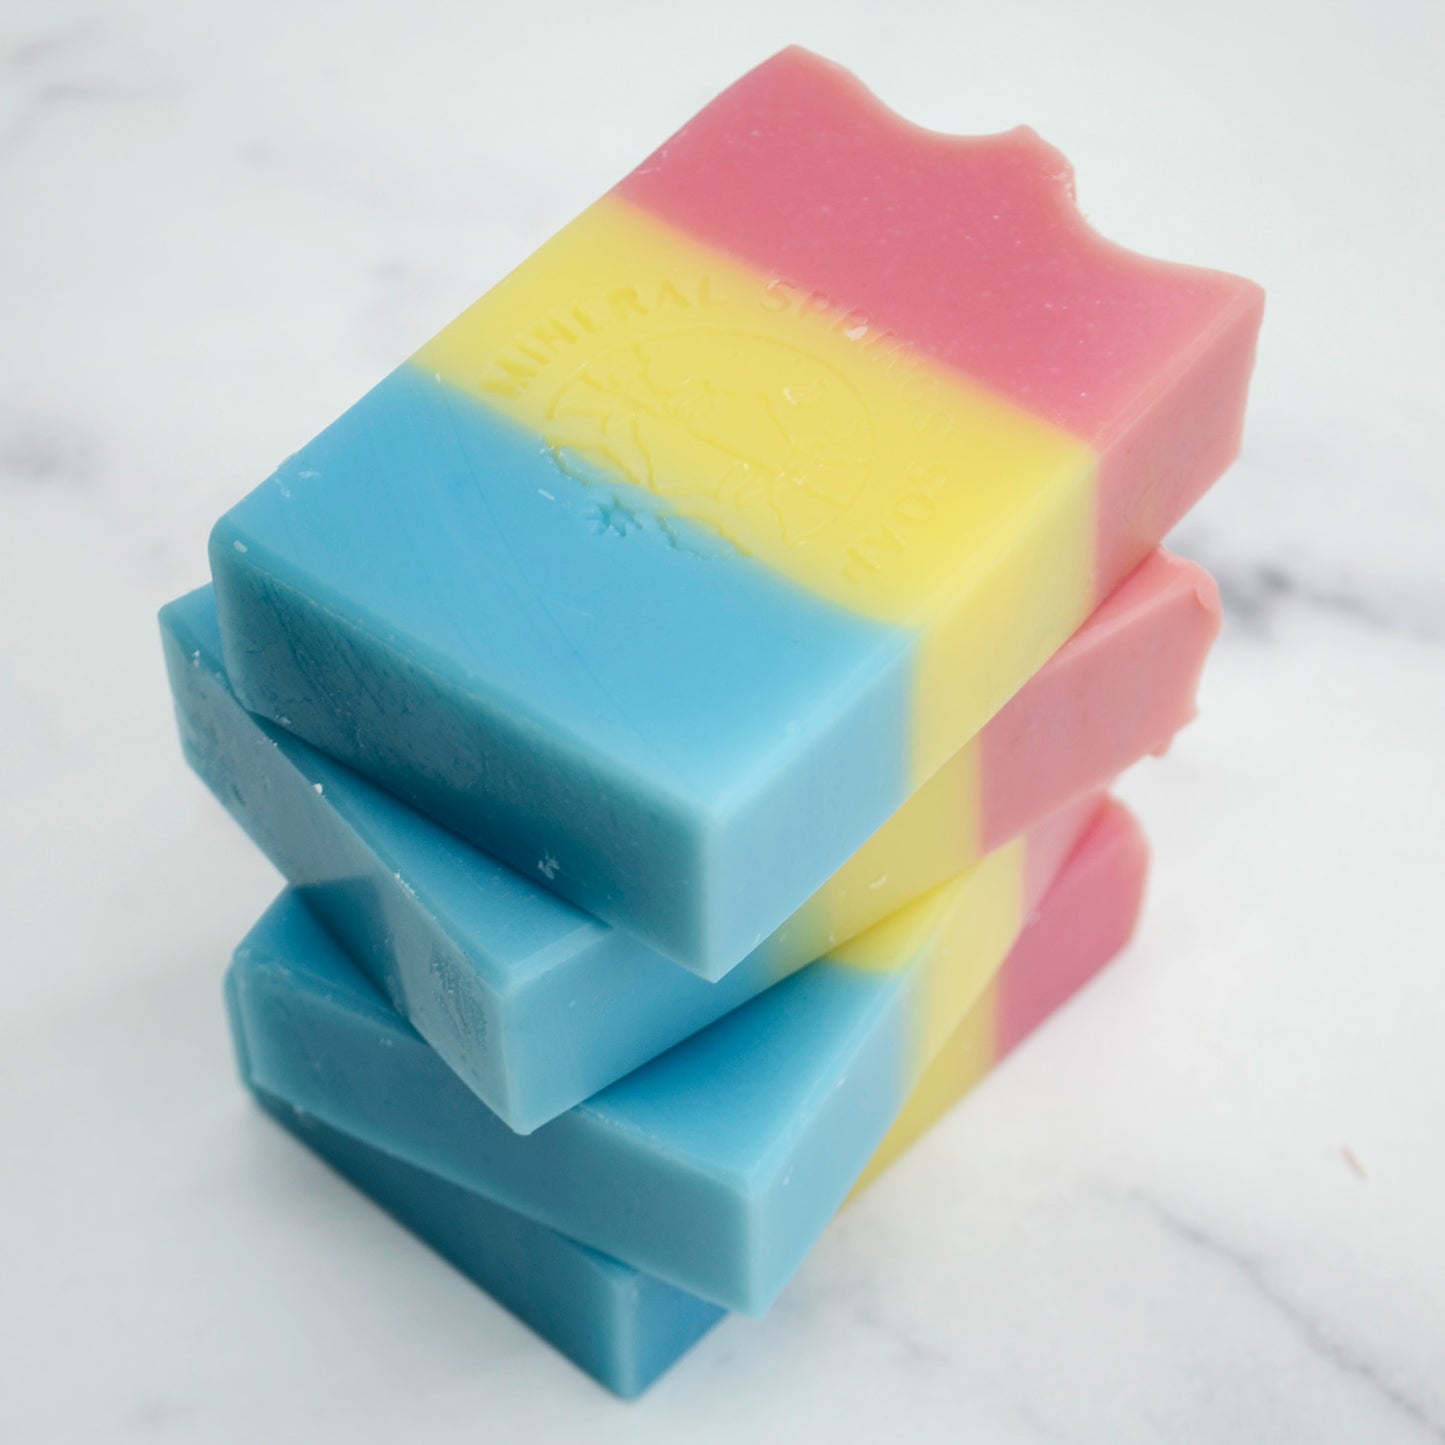 Pan Pride Strawberry Peach Handcrafted Soap